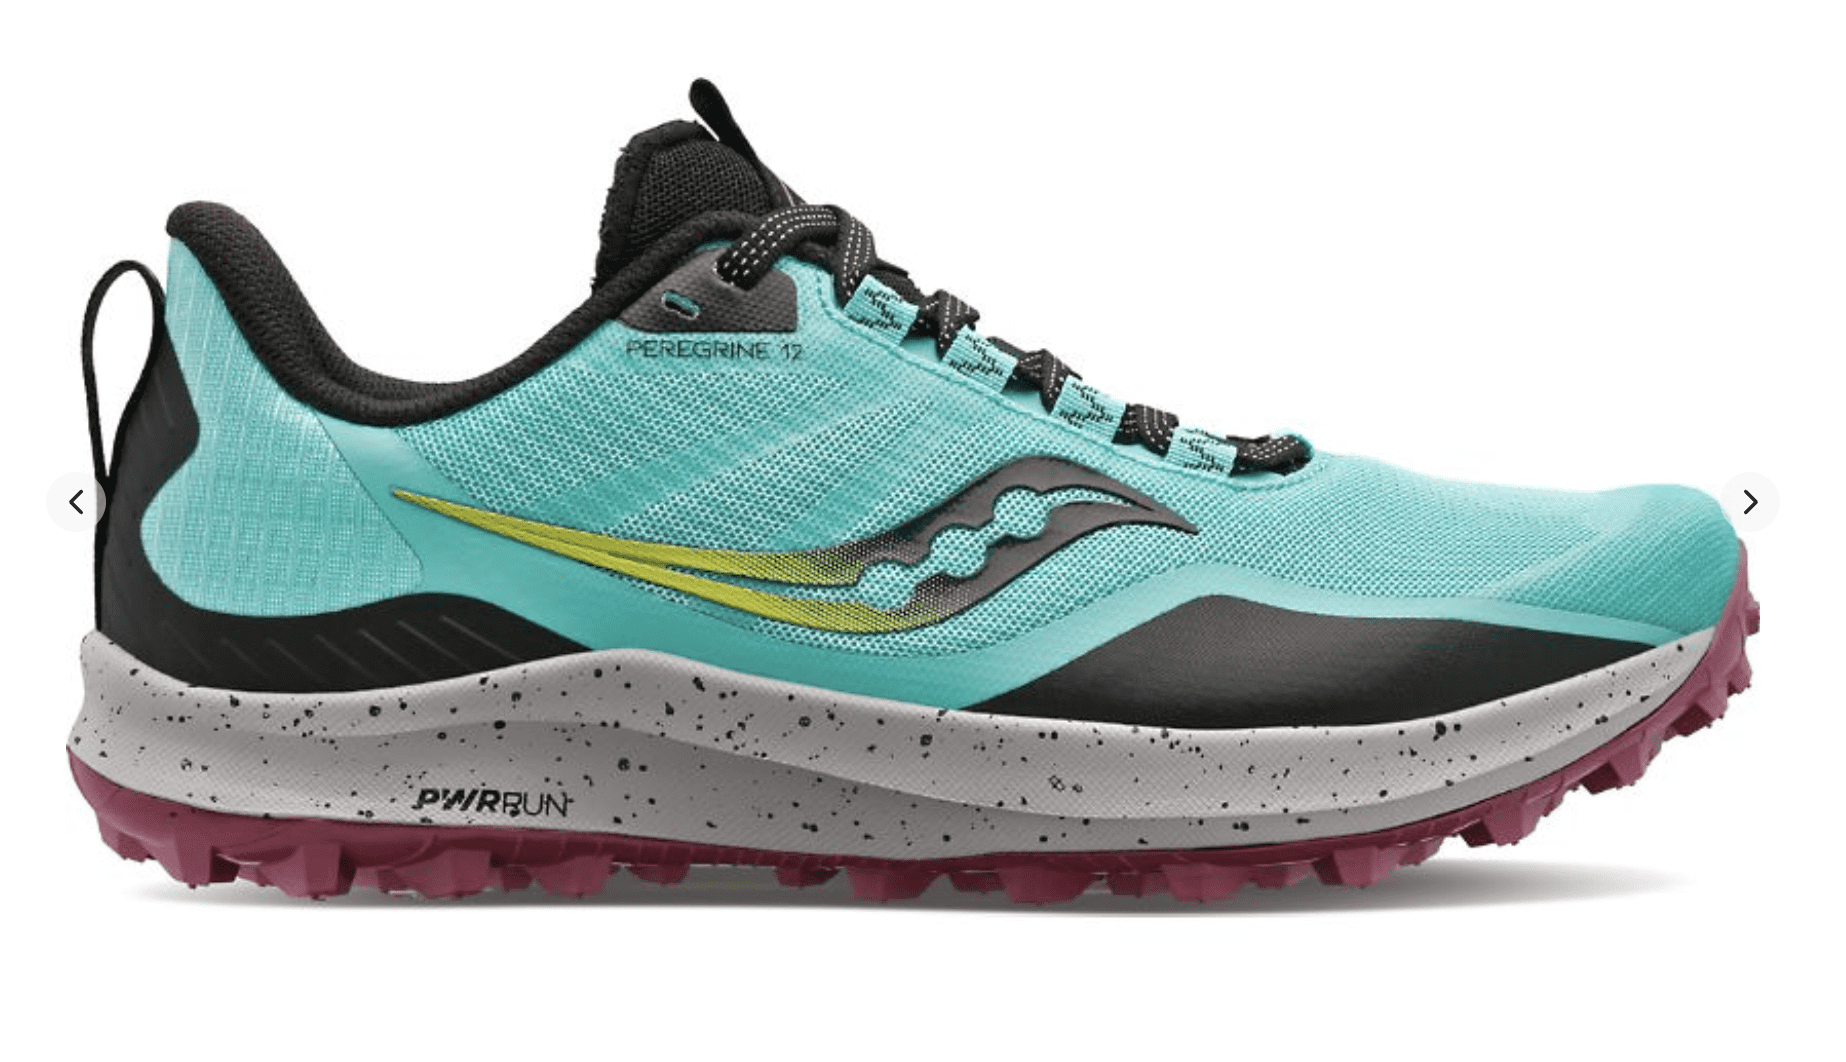 Saucony: Peregrine 12 Trail Running Shoes on sale.